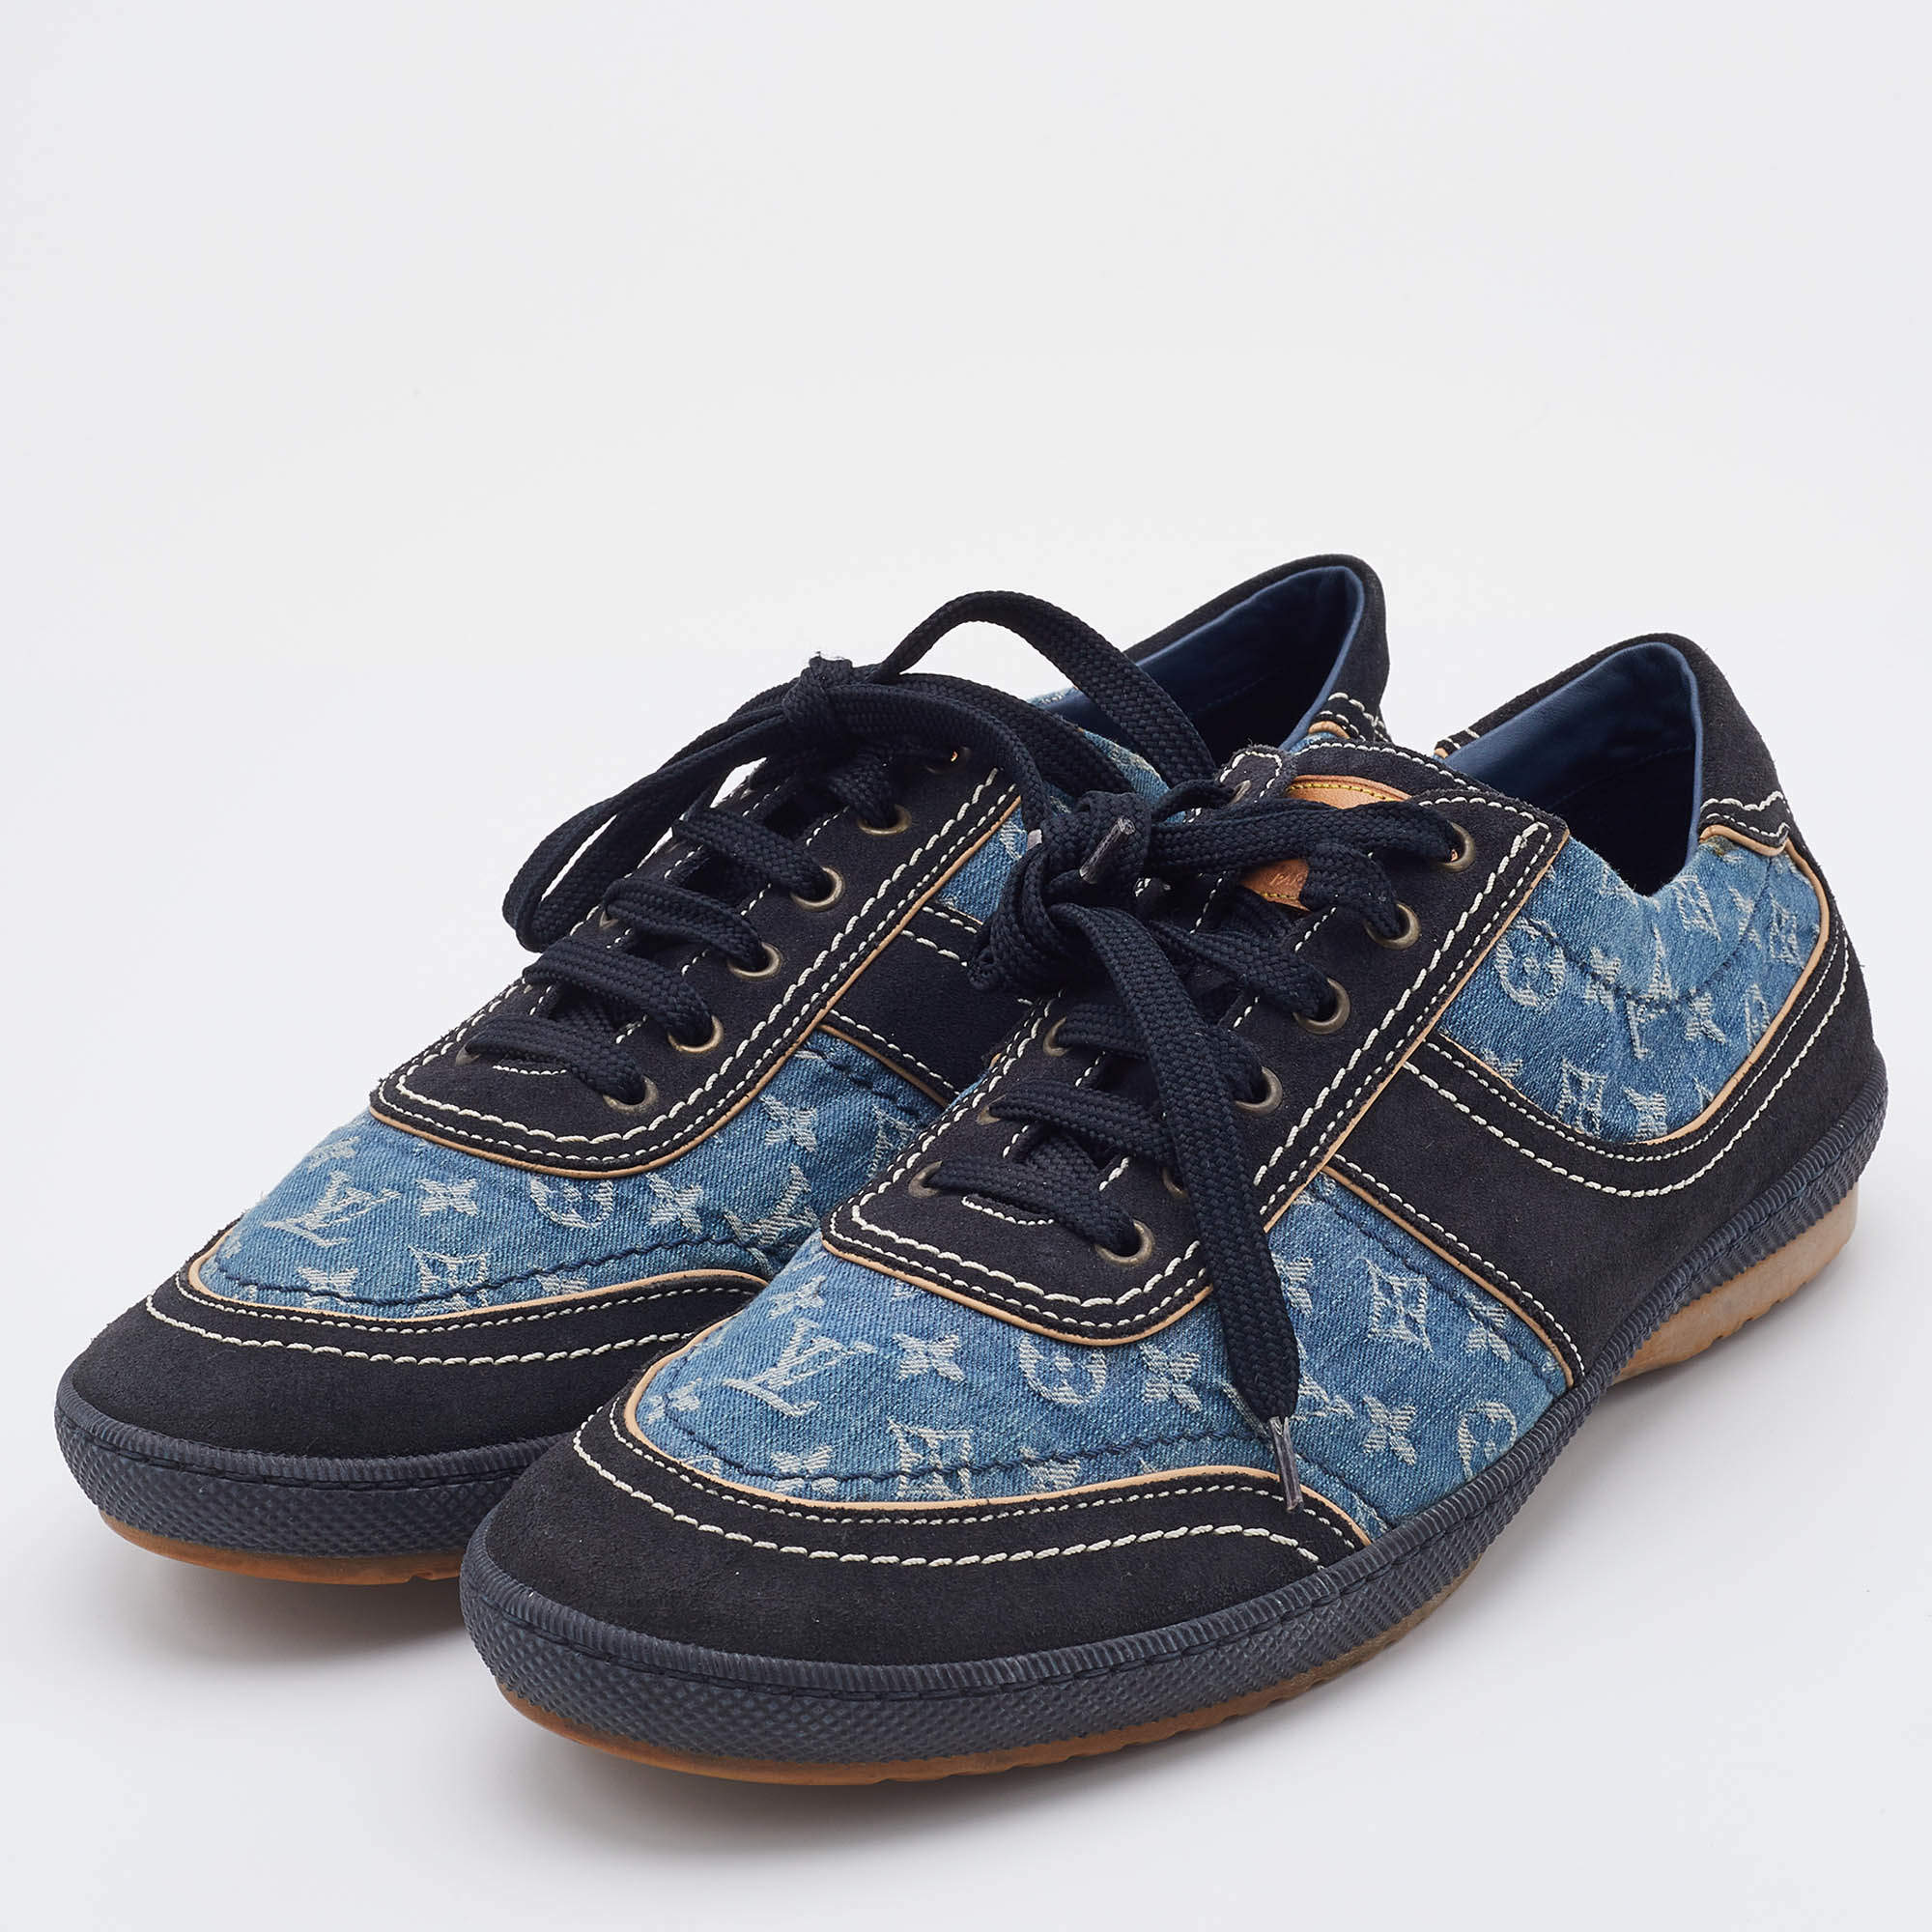 Louis Vuitton Monogram Denim and Leather Sneakers Size 40 Louis